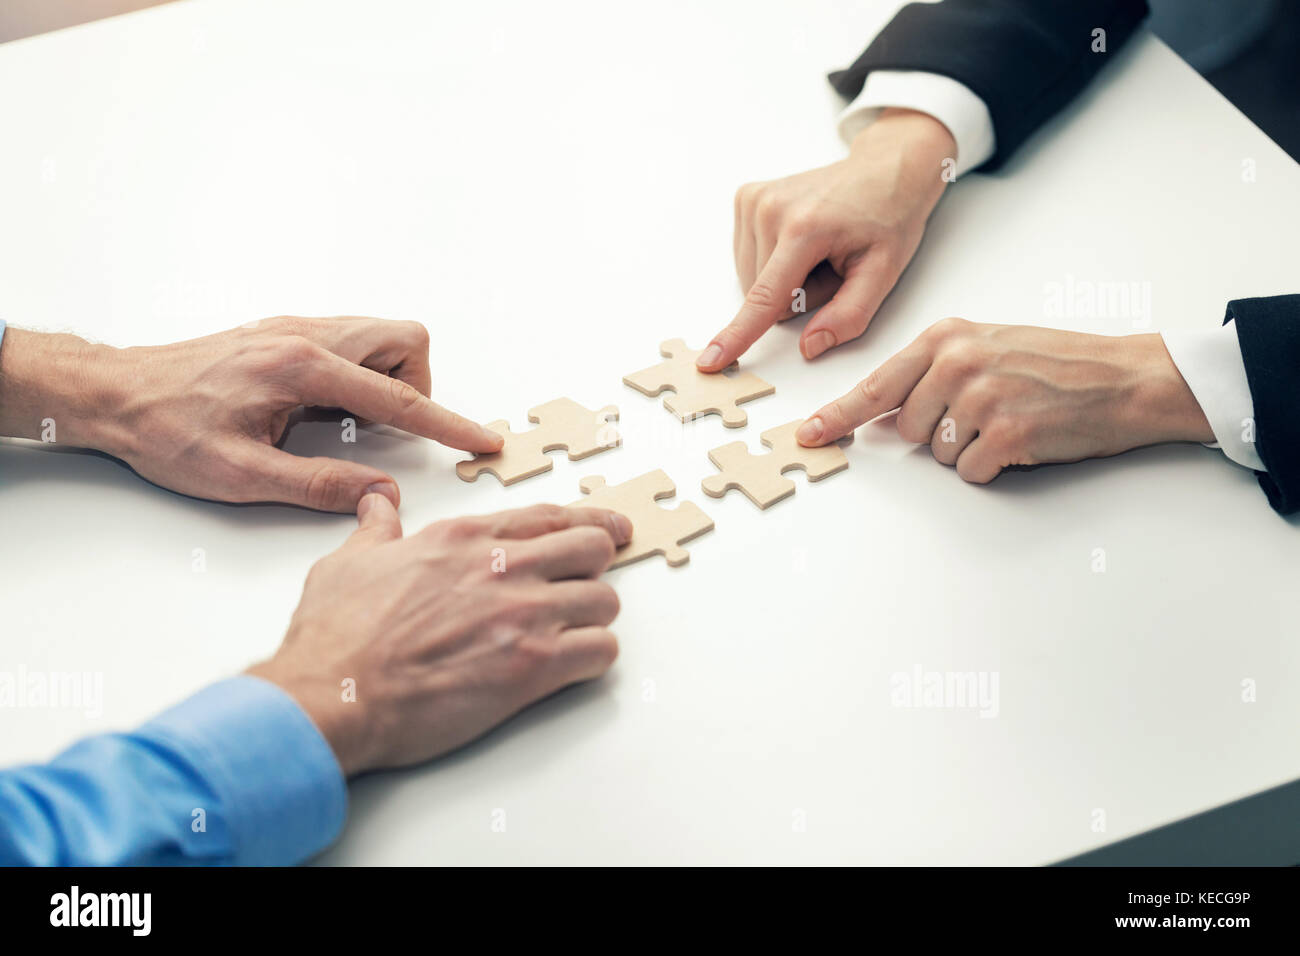 business cooperation concept - businessmen's  connecting puzzle pieces Stock Photo